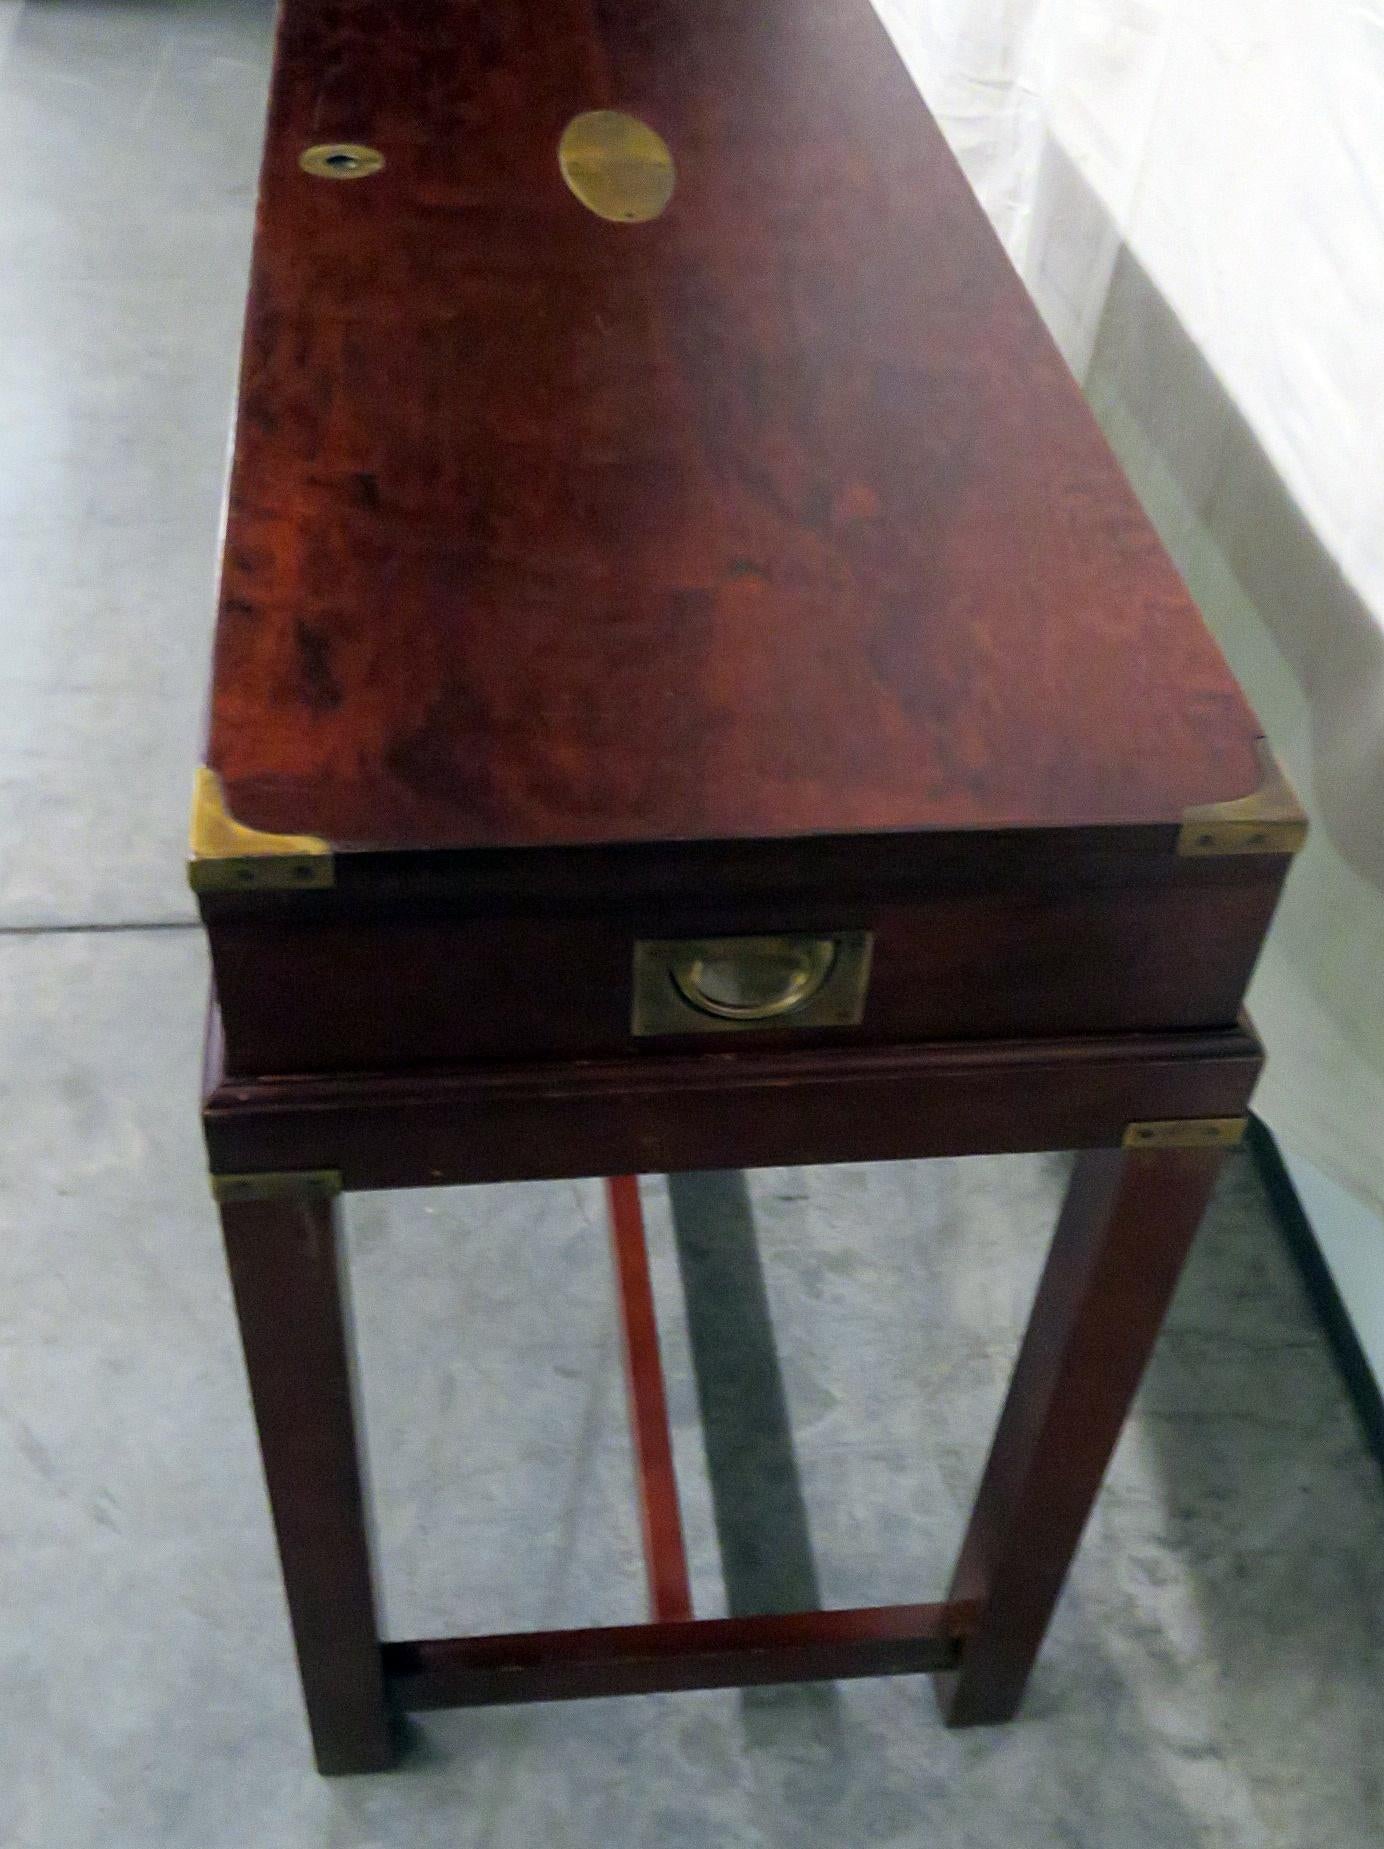 Campaign style box on stand with bronze accents.